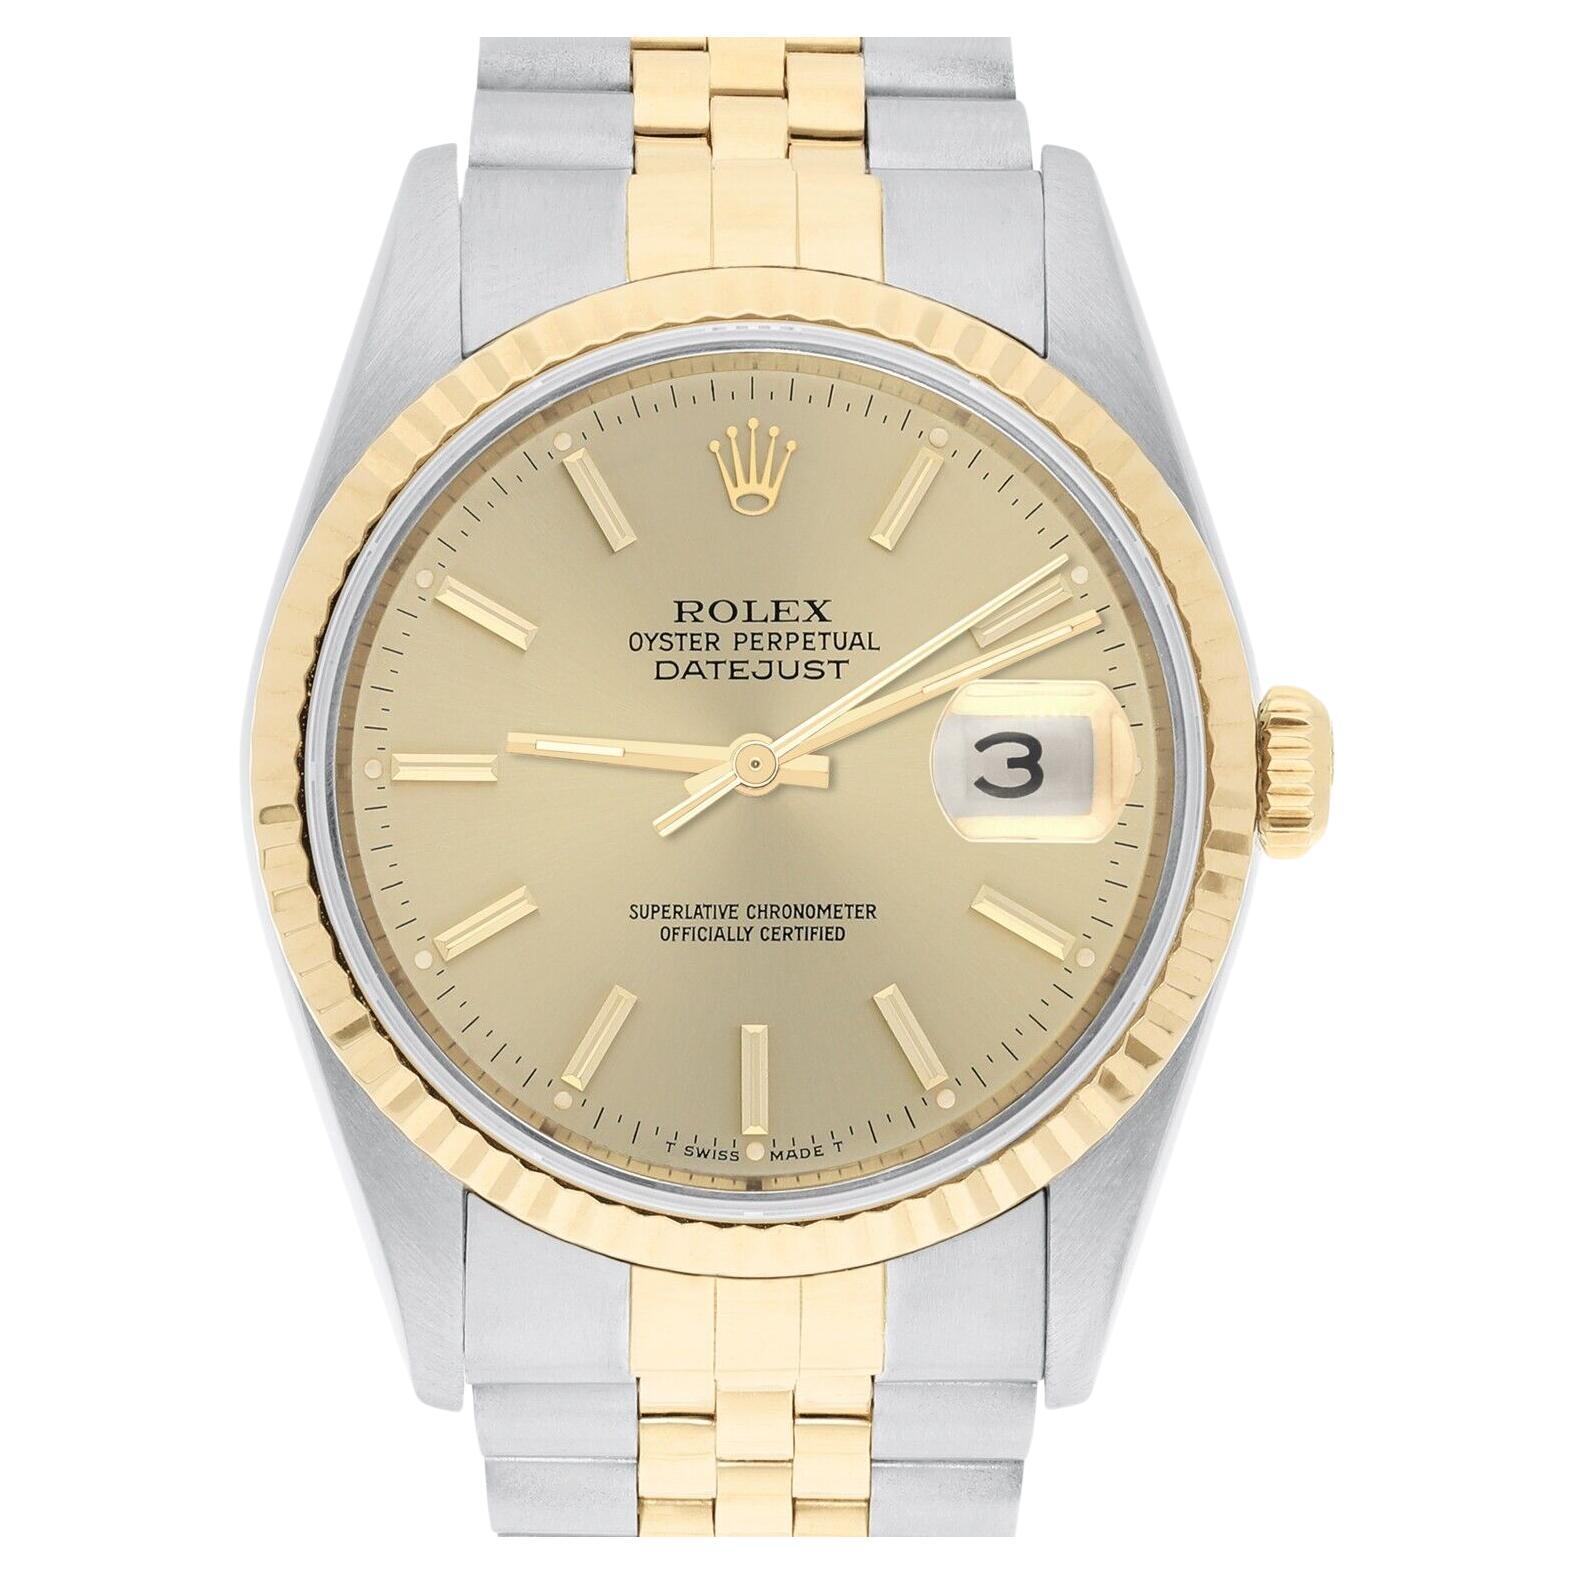 Rolex Datejust 36mm Two Tone Champagne Index Dial Jubilee 16233 Circa 2001 B/P